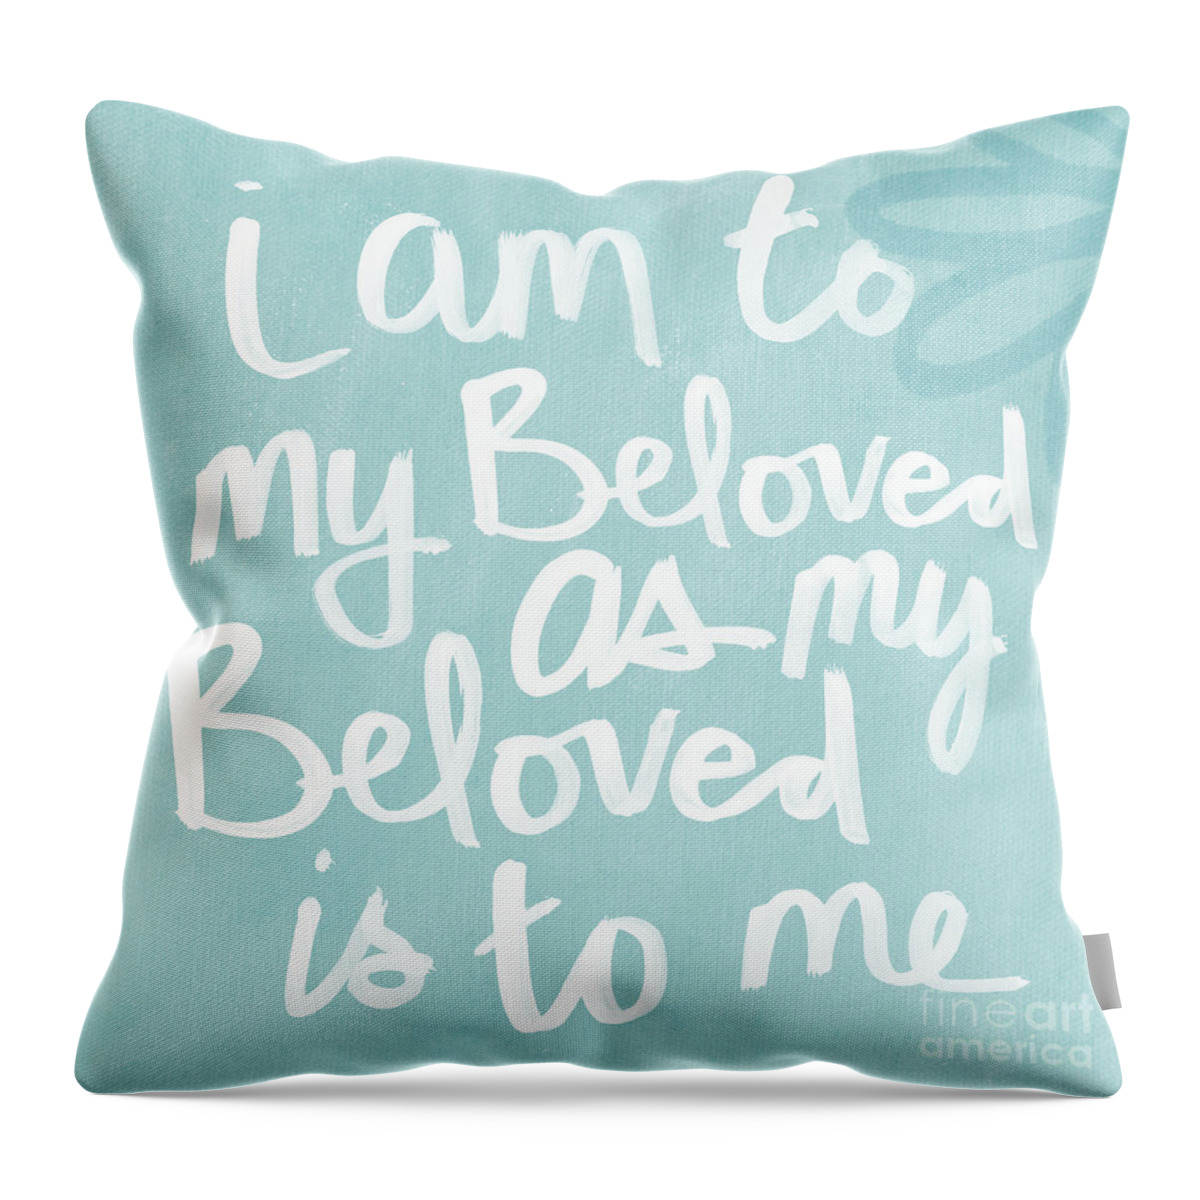 Beloved Throw Pillow featuring the painting Beloved by Linda Woods